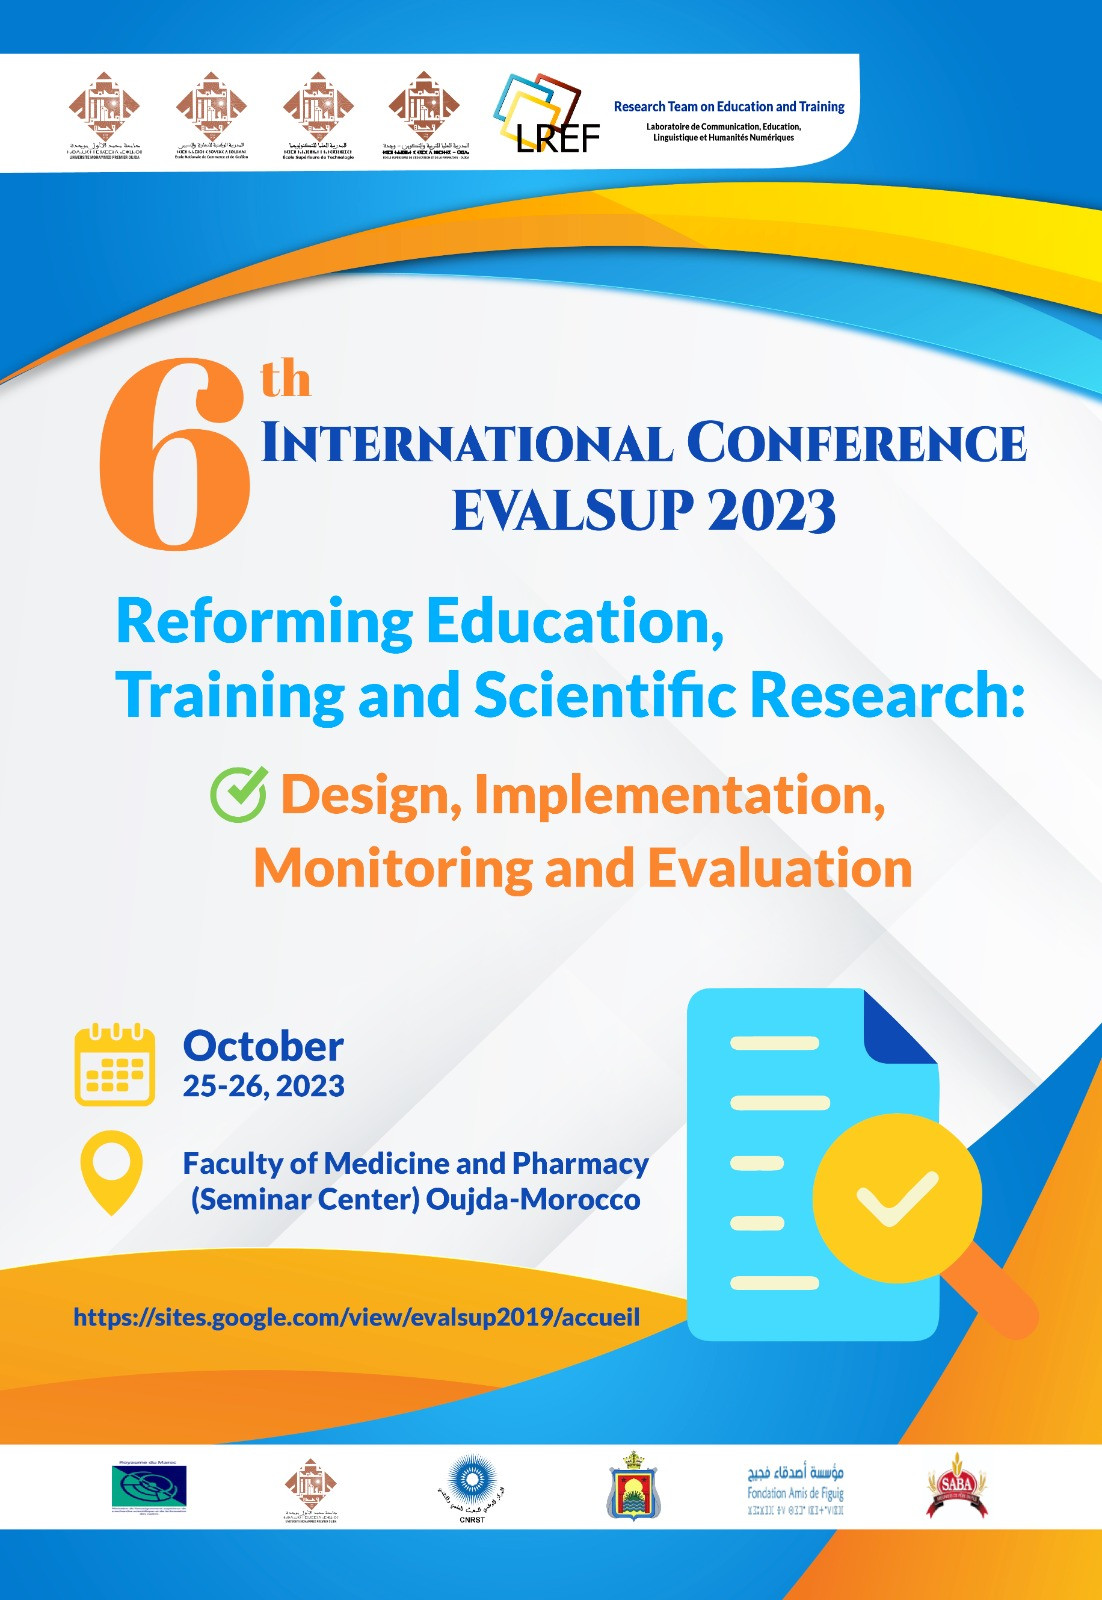 International Conference EVALSUP 2023 (Evaluation in Higher Education)   6th Edition  Reforming Education, Training and Scientific Research: Design, Implementation, Monitoring and Evaluation  Oujda-Morocco, October 25-26, 2023